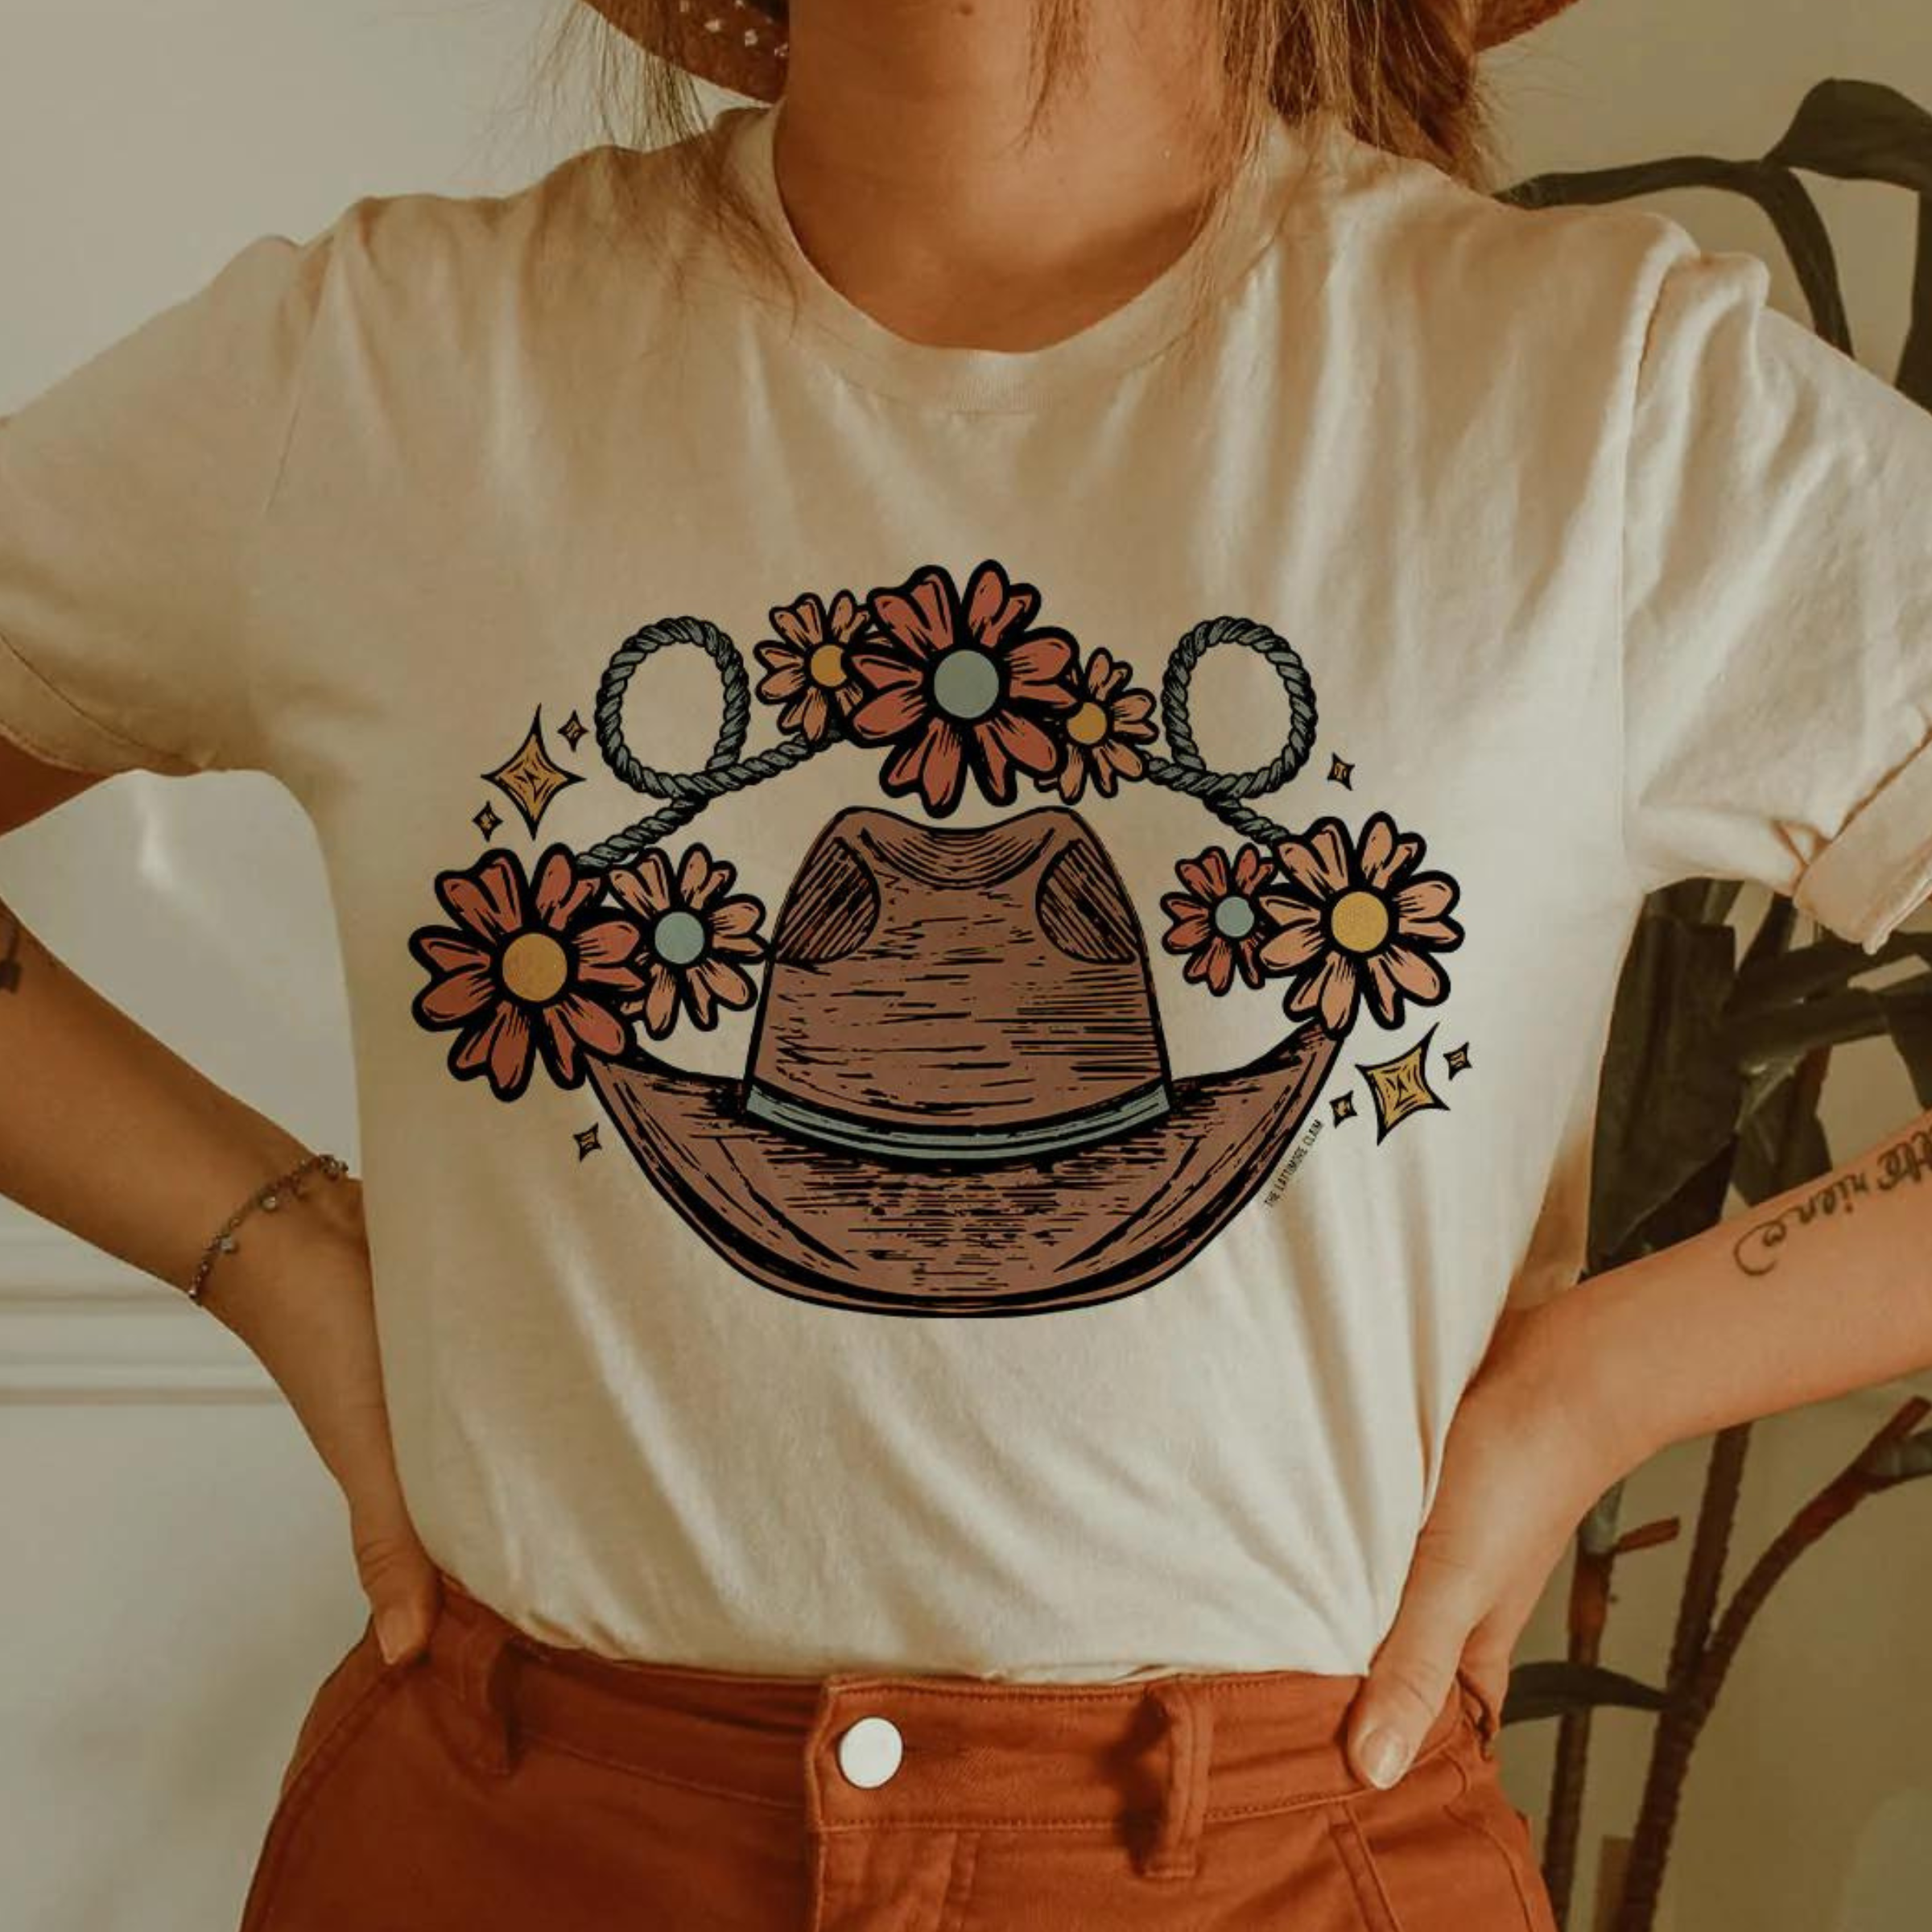 This cream graphic tee includes a crew neckline, short sleeves, and cute hand drawn design of a cowboy hat, rope, stars, and flowers. This tee is shown in this photo styled with a straw hat, silver dainty bracelet, and rust jeans.